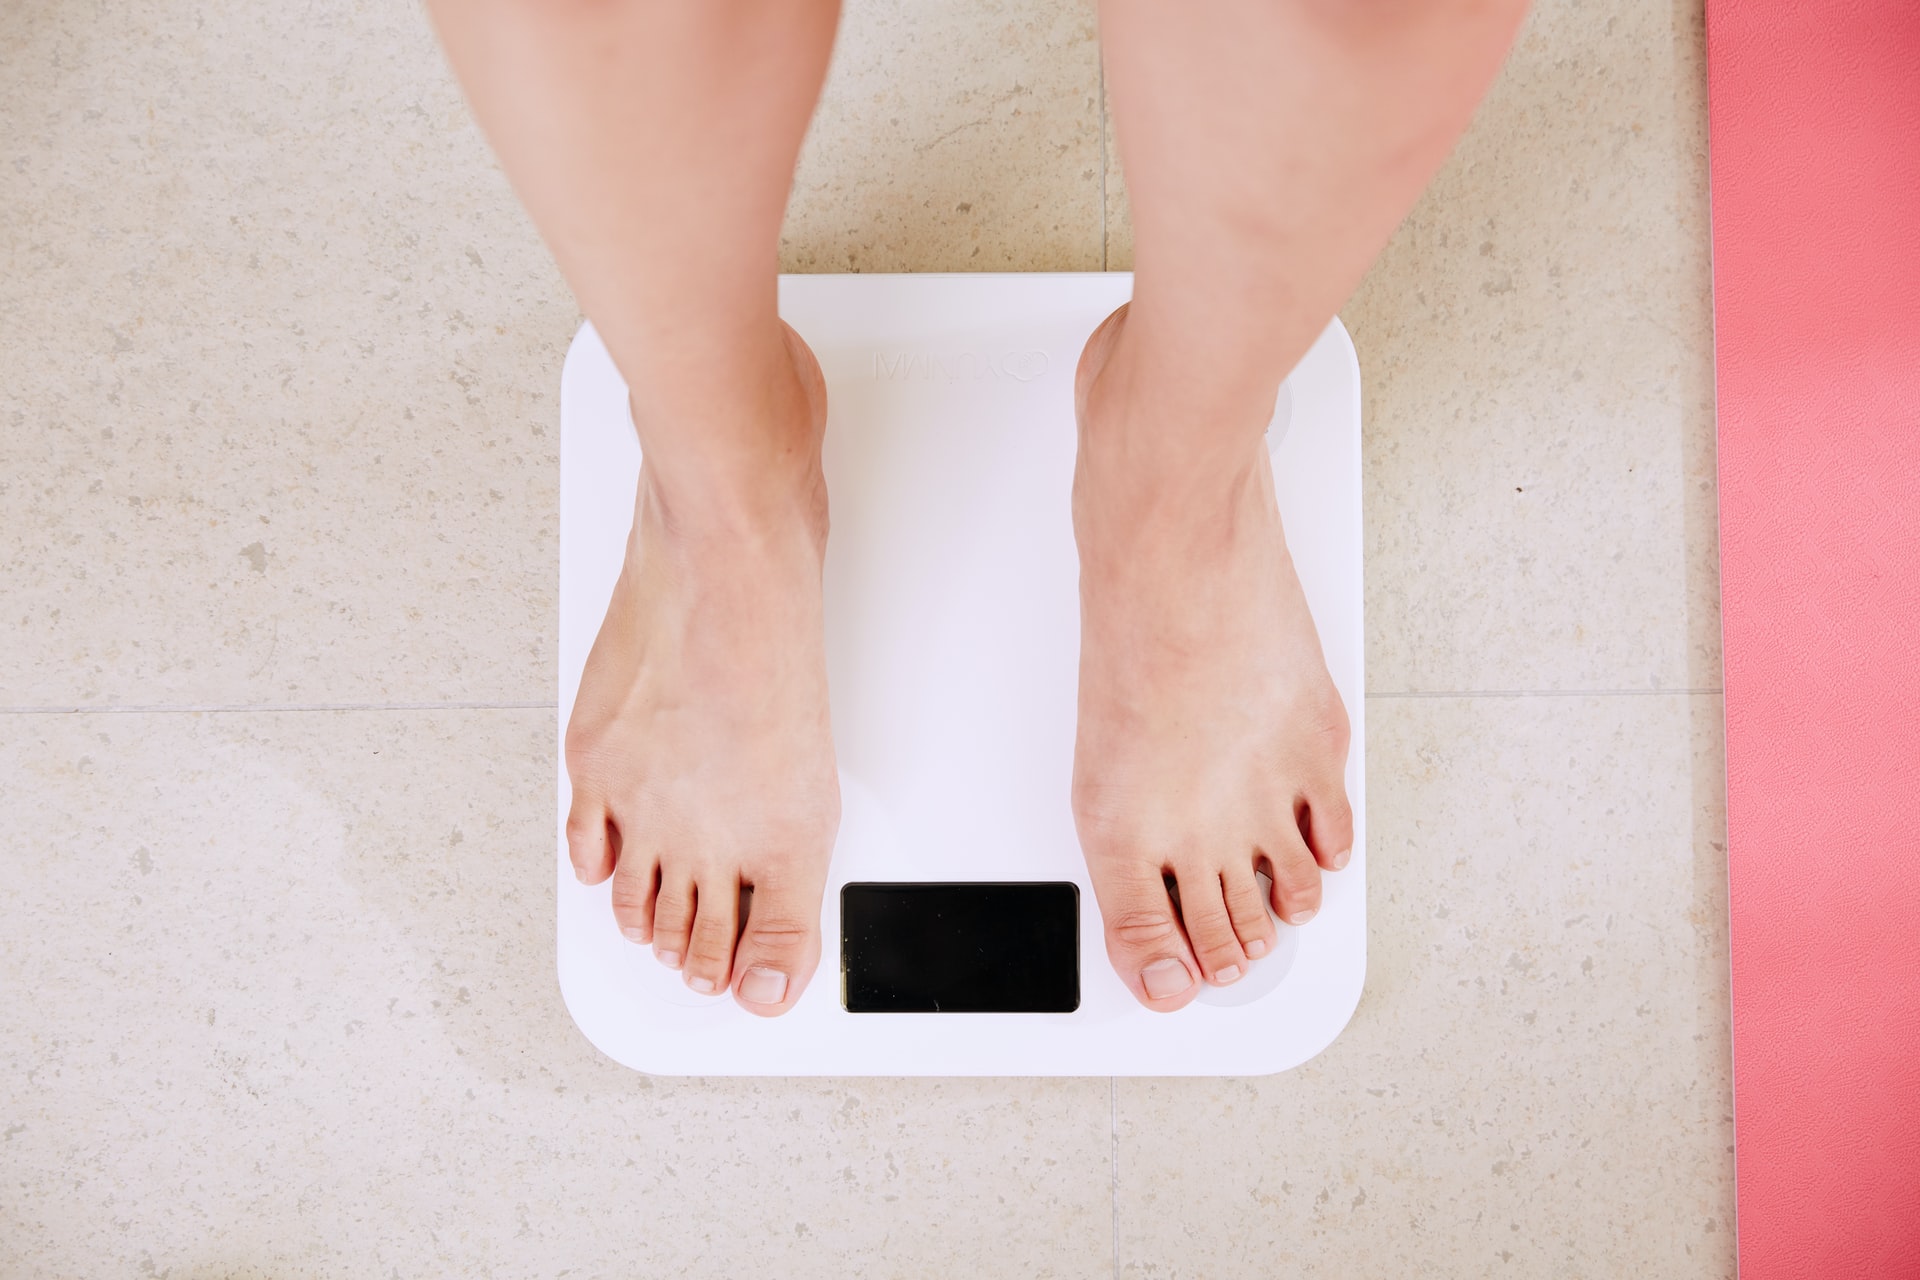 Can A Redesigned Scale Really Help You Lose Weight?